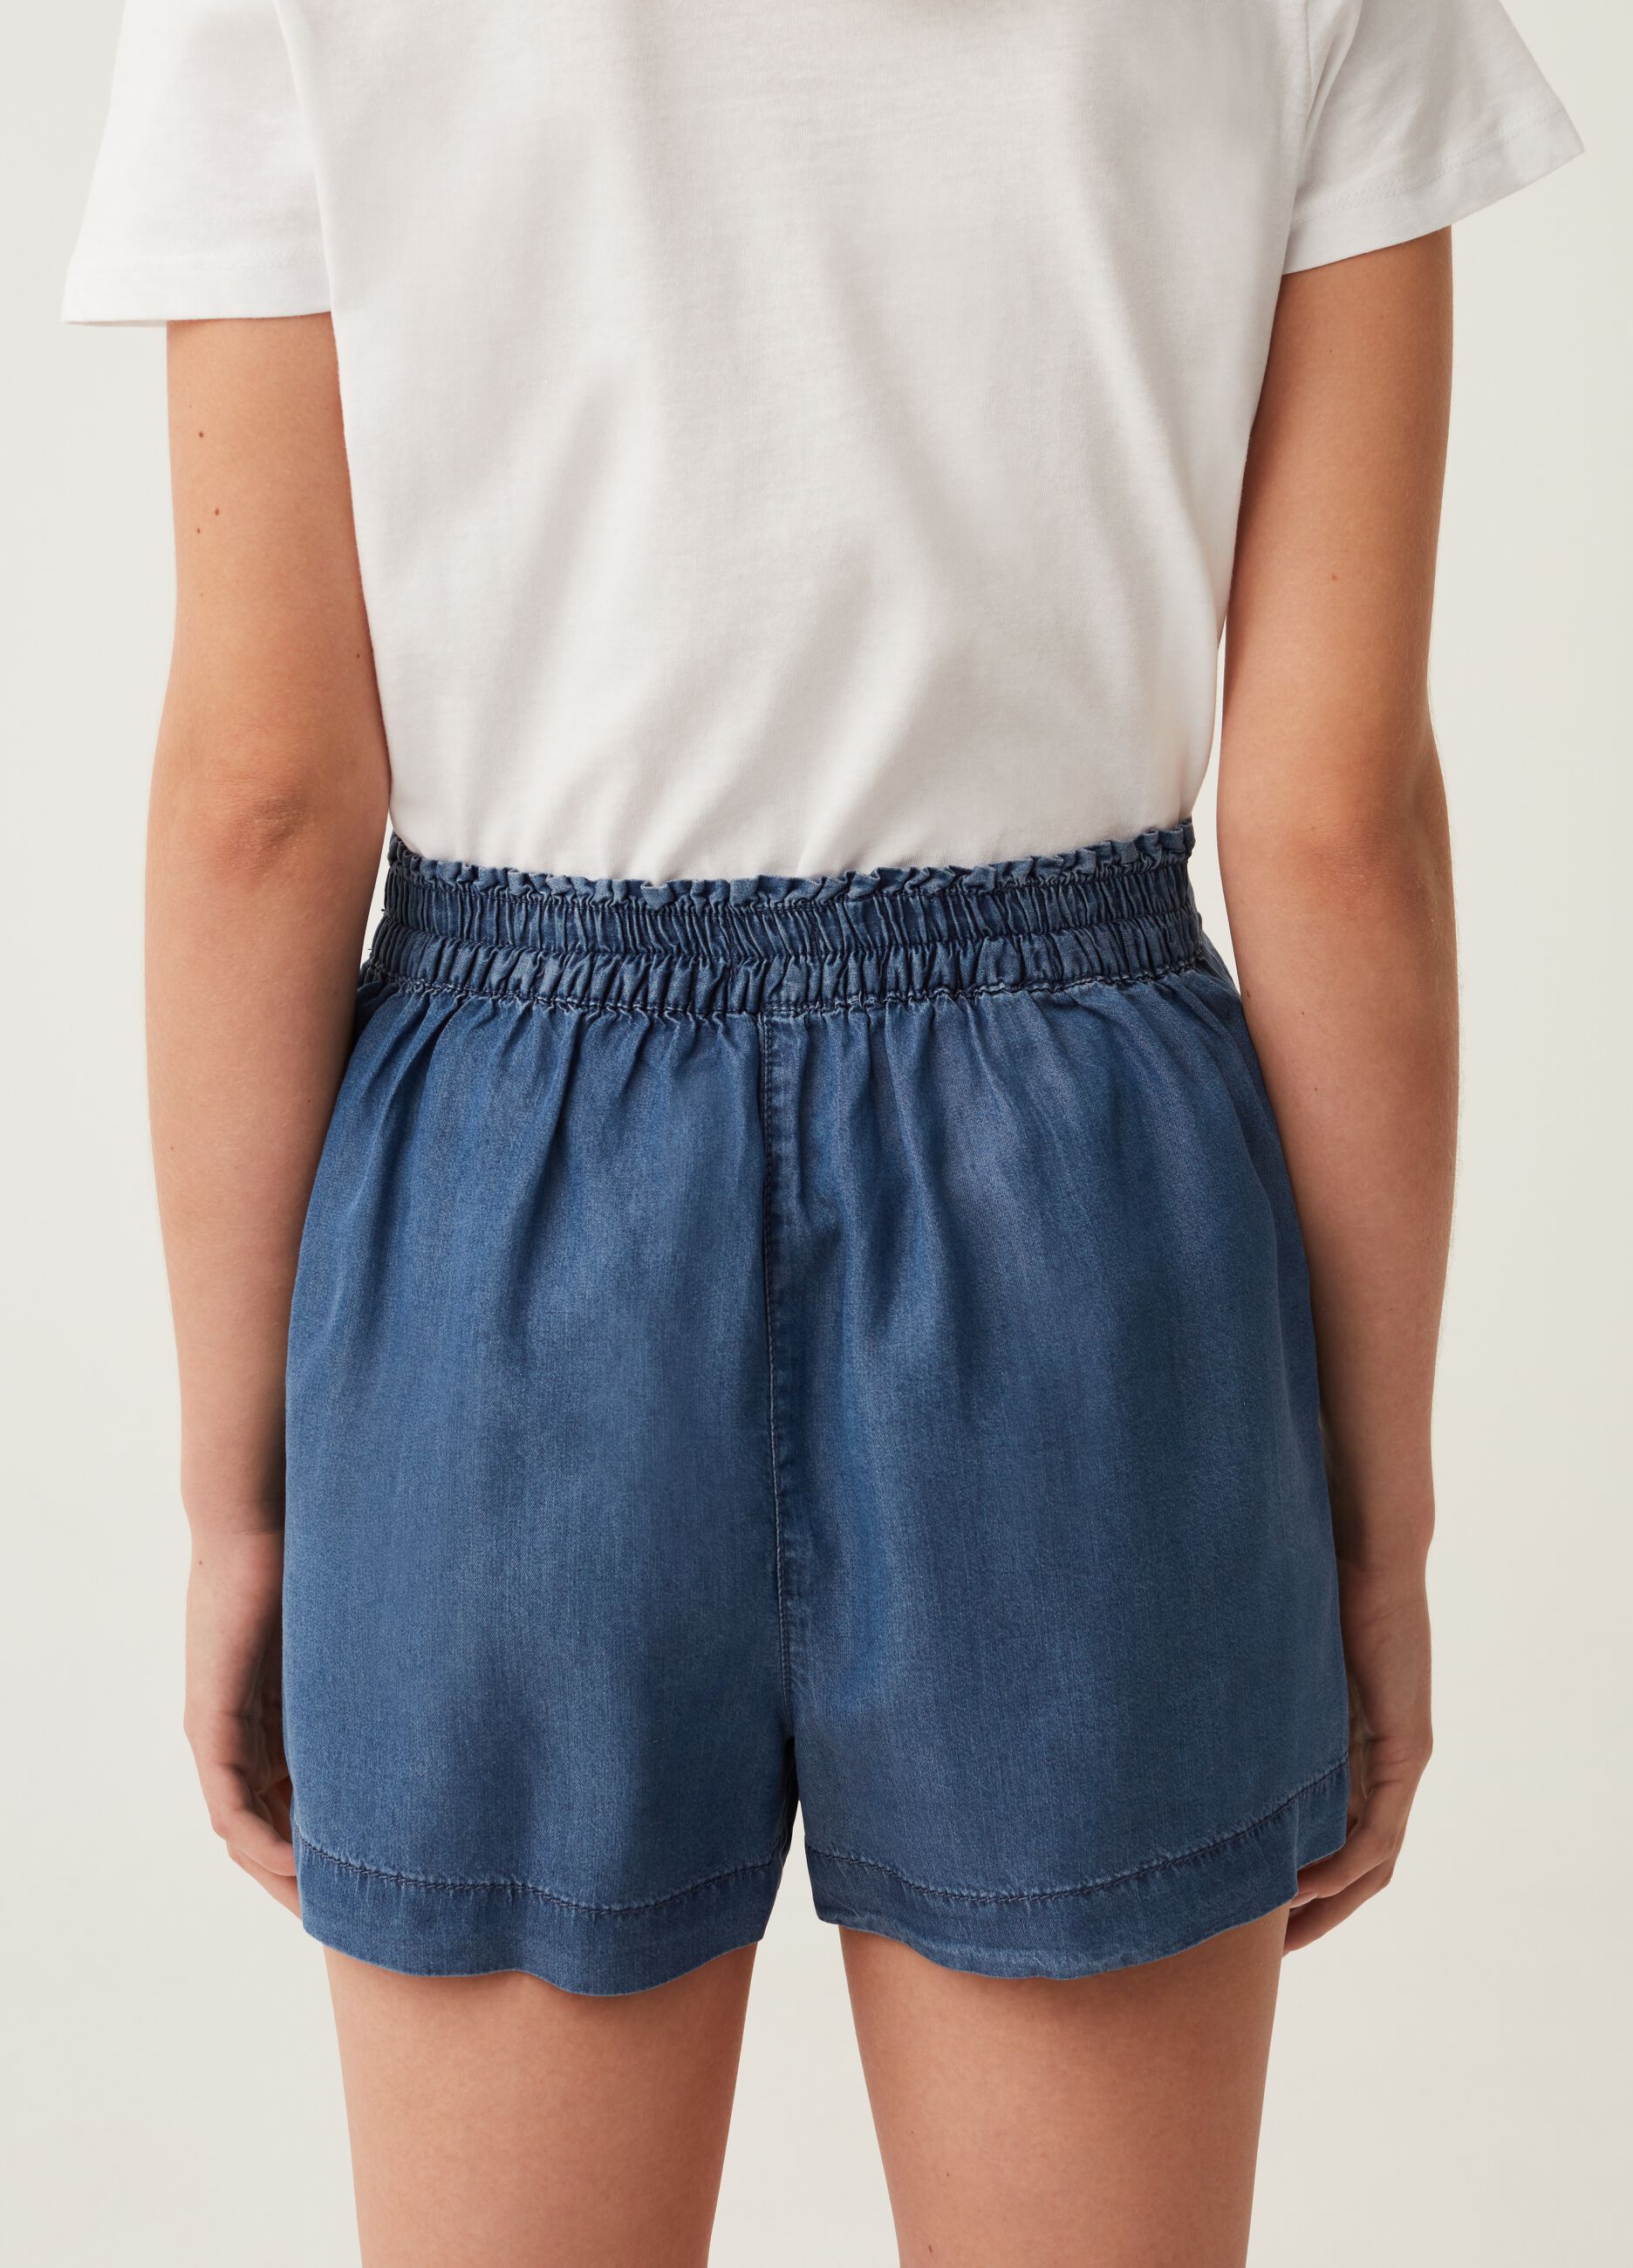 High-rise shorts with bow